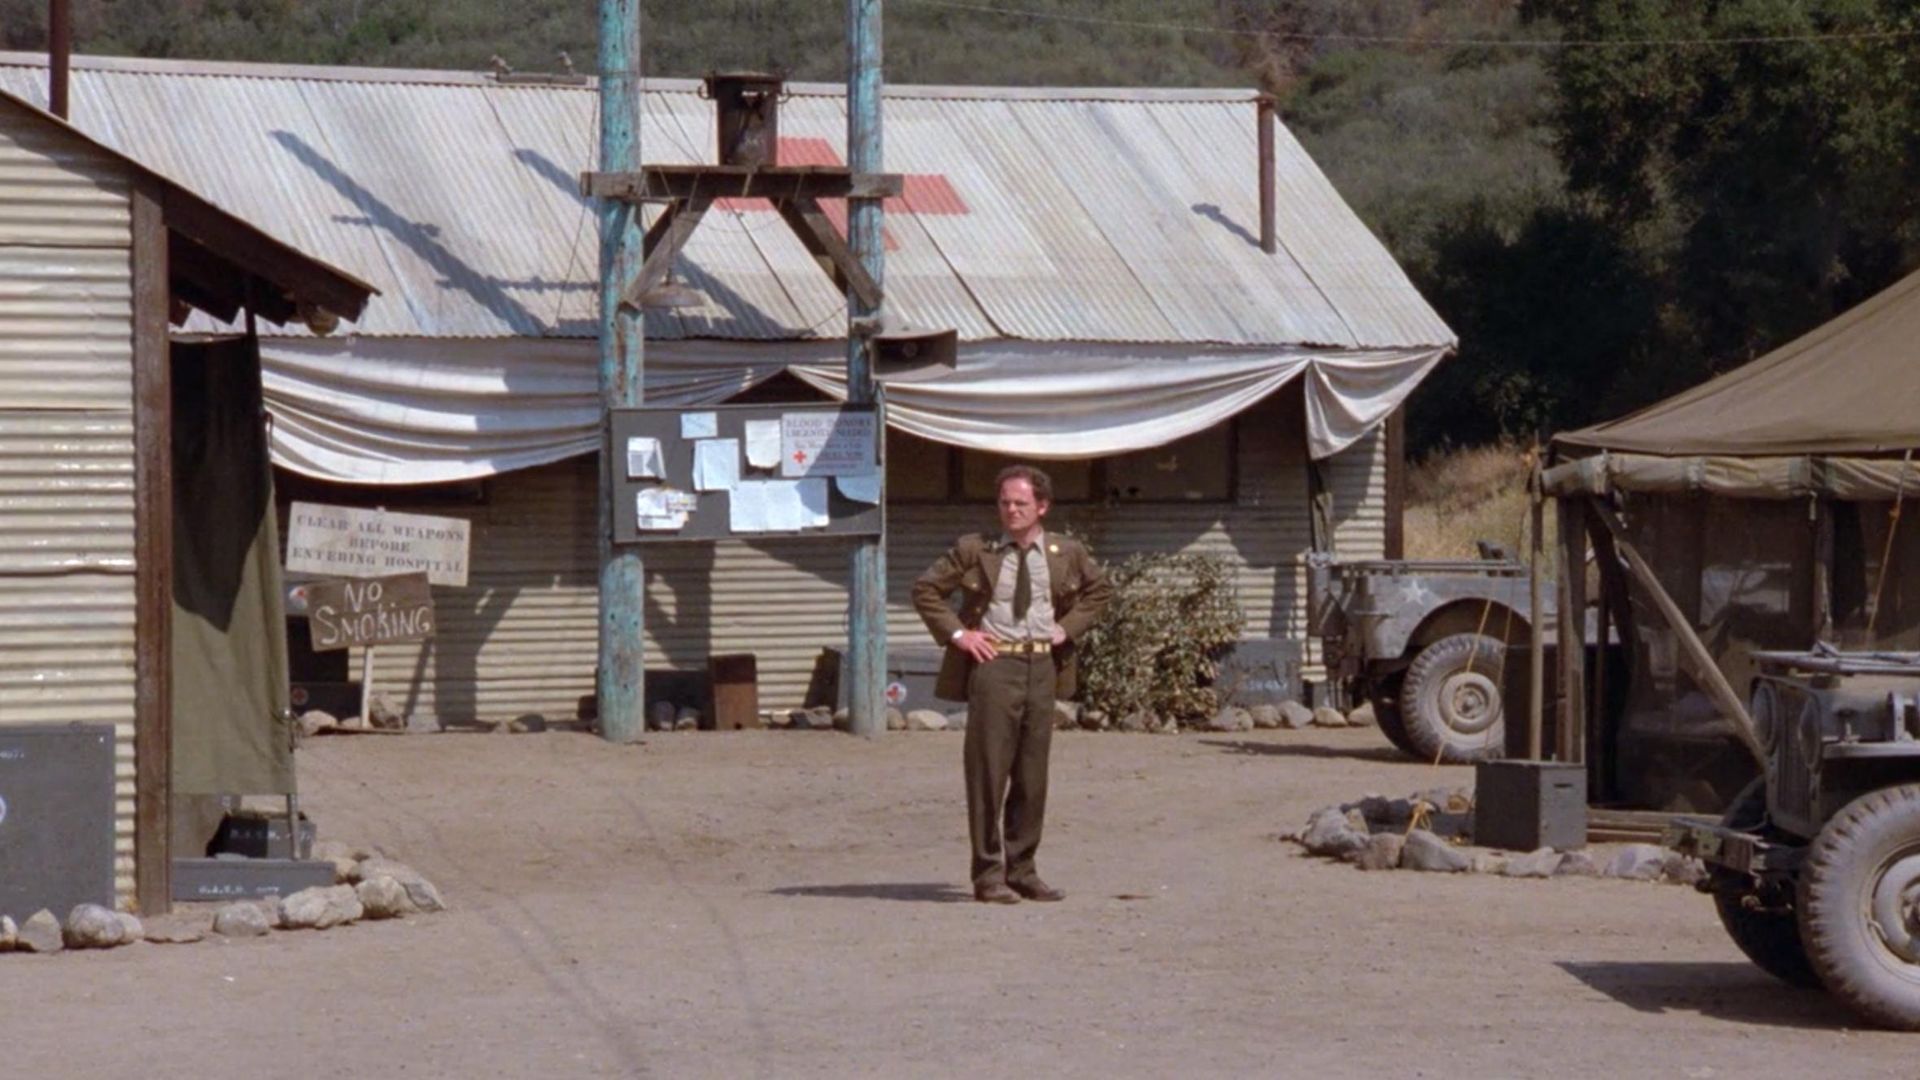 M*A*S*H background